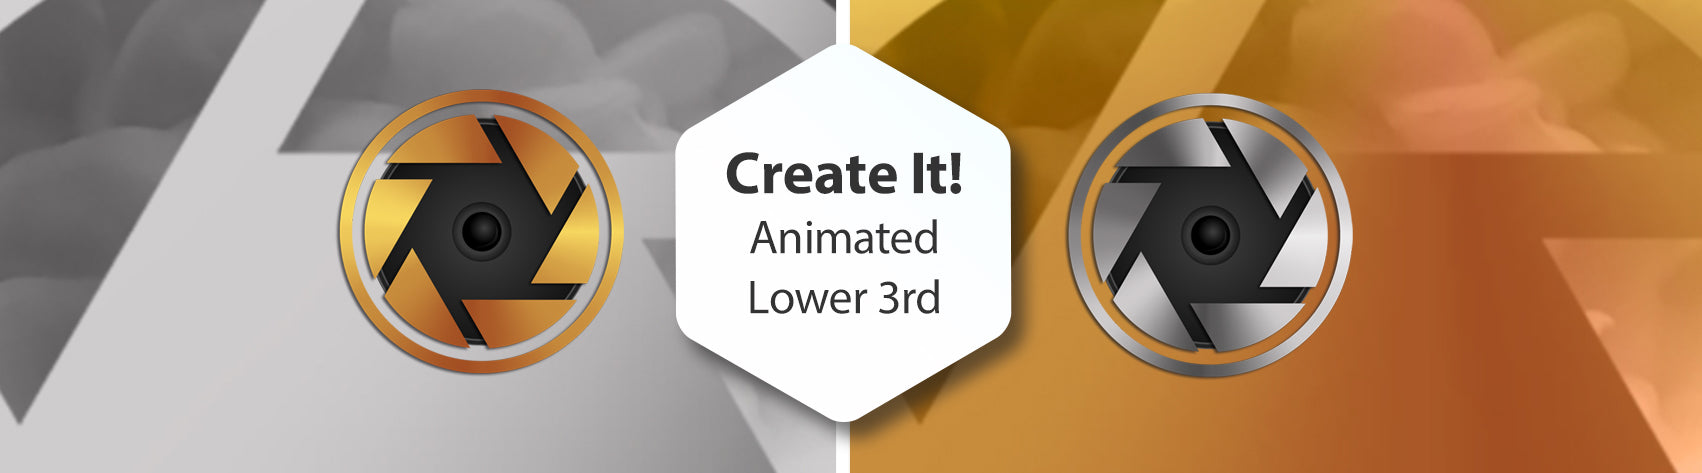 Create It! Animated Lower 3rd